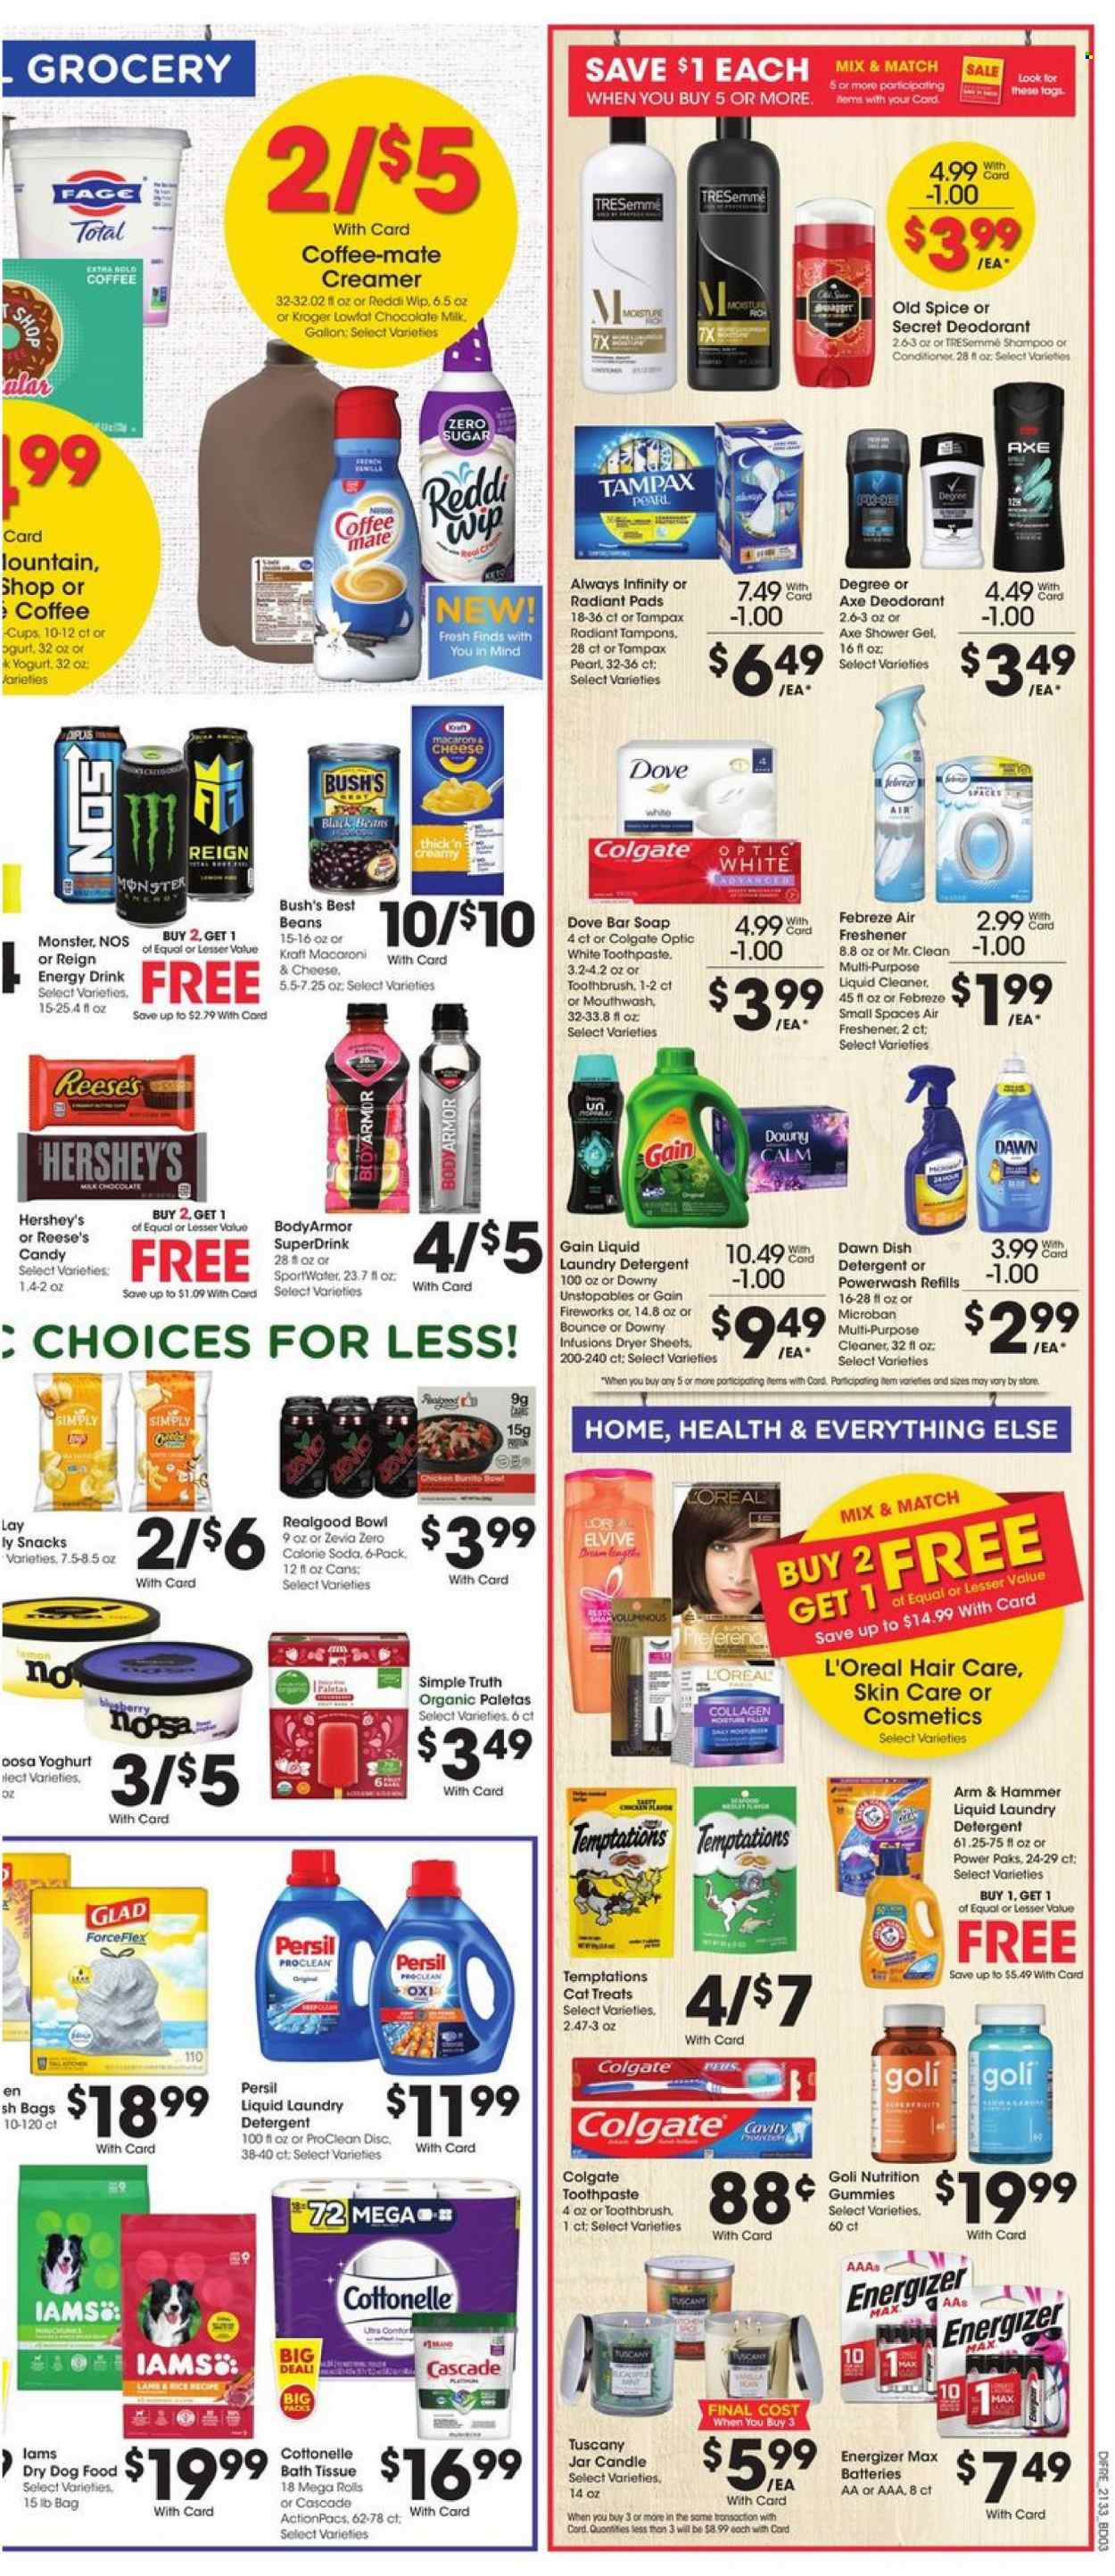 thumbnail - Baker's Flyer - 09/15/2021 - 09/21/2021 - Sales products - macaroni & cheese, burrito, Kraft®, yoghurt, Coffee-Mate, milk, creamer, Reese's, Hershey's, milk chocolate, snack, ARM & HAMMER, black beans, spice, energy drink, Monster, soda, Dove, bath tissue, Cottonelle, detergent, Febreze, Gain, cleaner, liquid cleaner, Cascade, Unstopables, Persil, laundry detergent, dryer sheets, Gain Fireworks, Downy Laundry, shampoo, shower gel, Old Spice, soap bar, soap, Colgate, toothbrush, toothpaste, mouthwash, Tampax, tampons, Always Infinity, L’Oréal, conditioner, TRESemmé, anti-perspirant, deodorant, cup, bowl, candle, air freshener, battery, Energizer, animal food, dog food, dry dog food, Iams. Page 6.